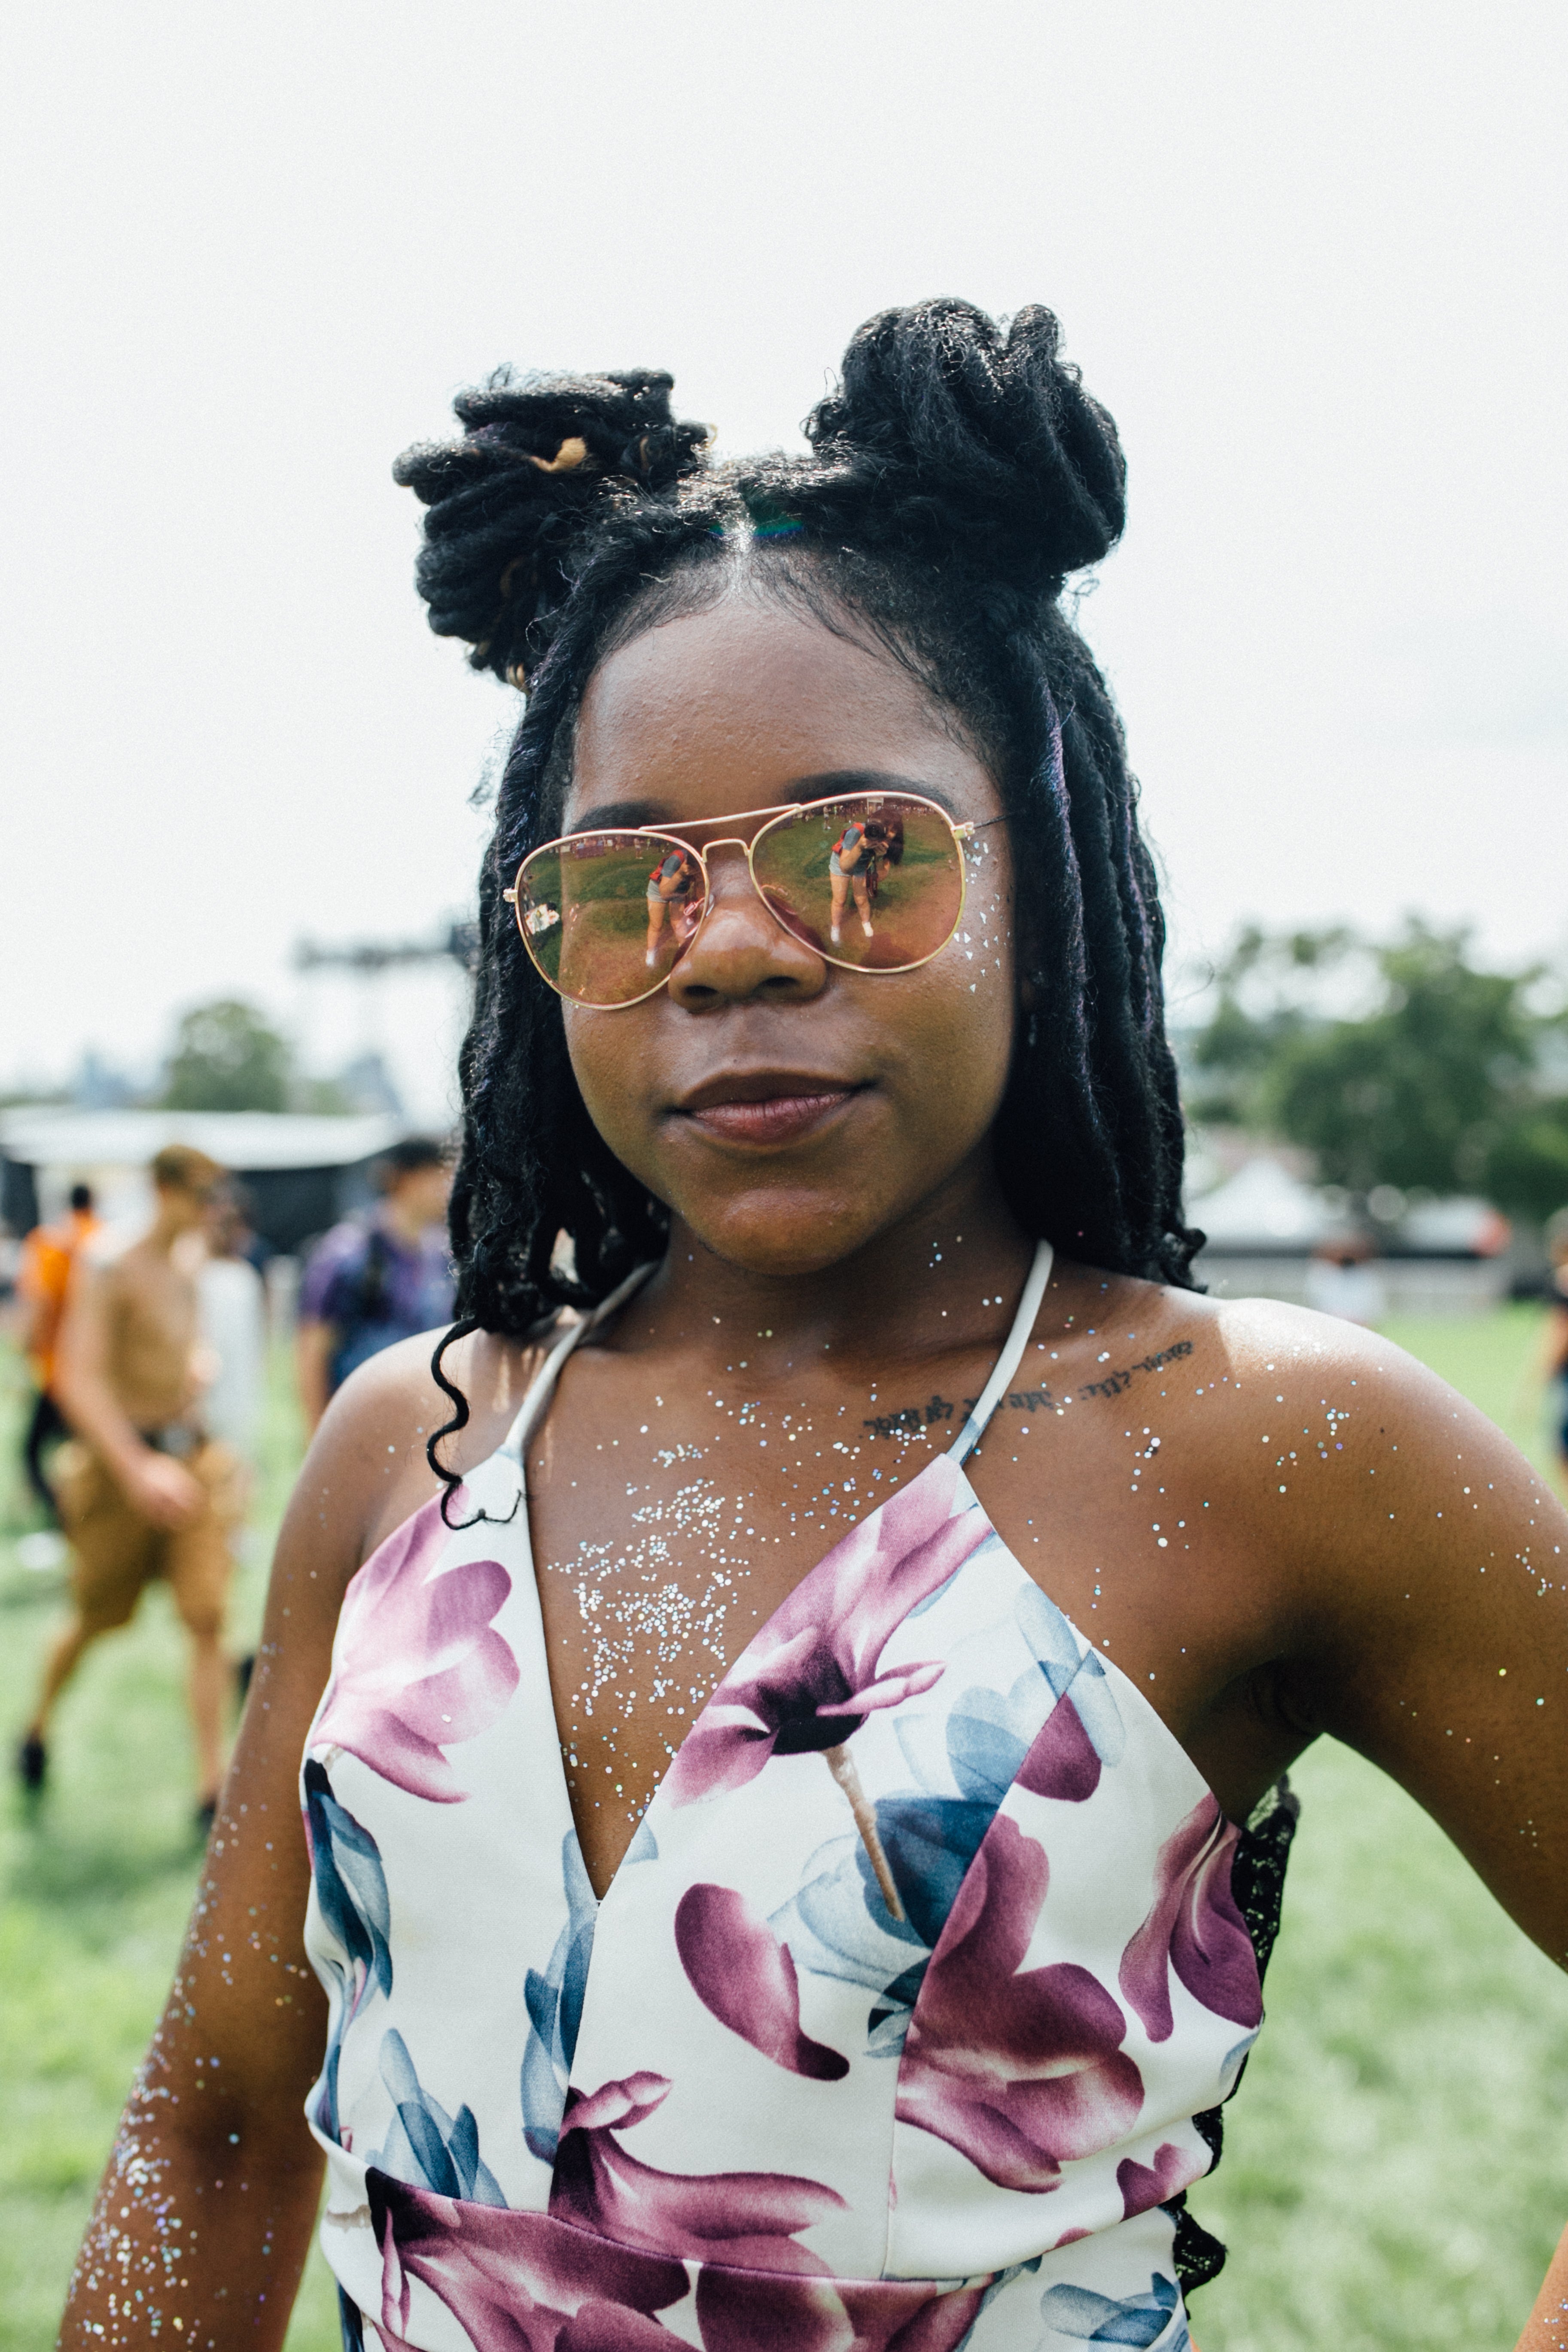 Behold! The Best Hair and Beauty From Panorama Festival